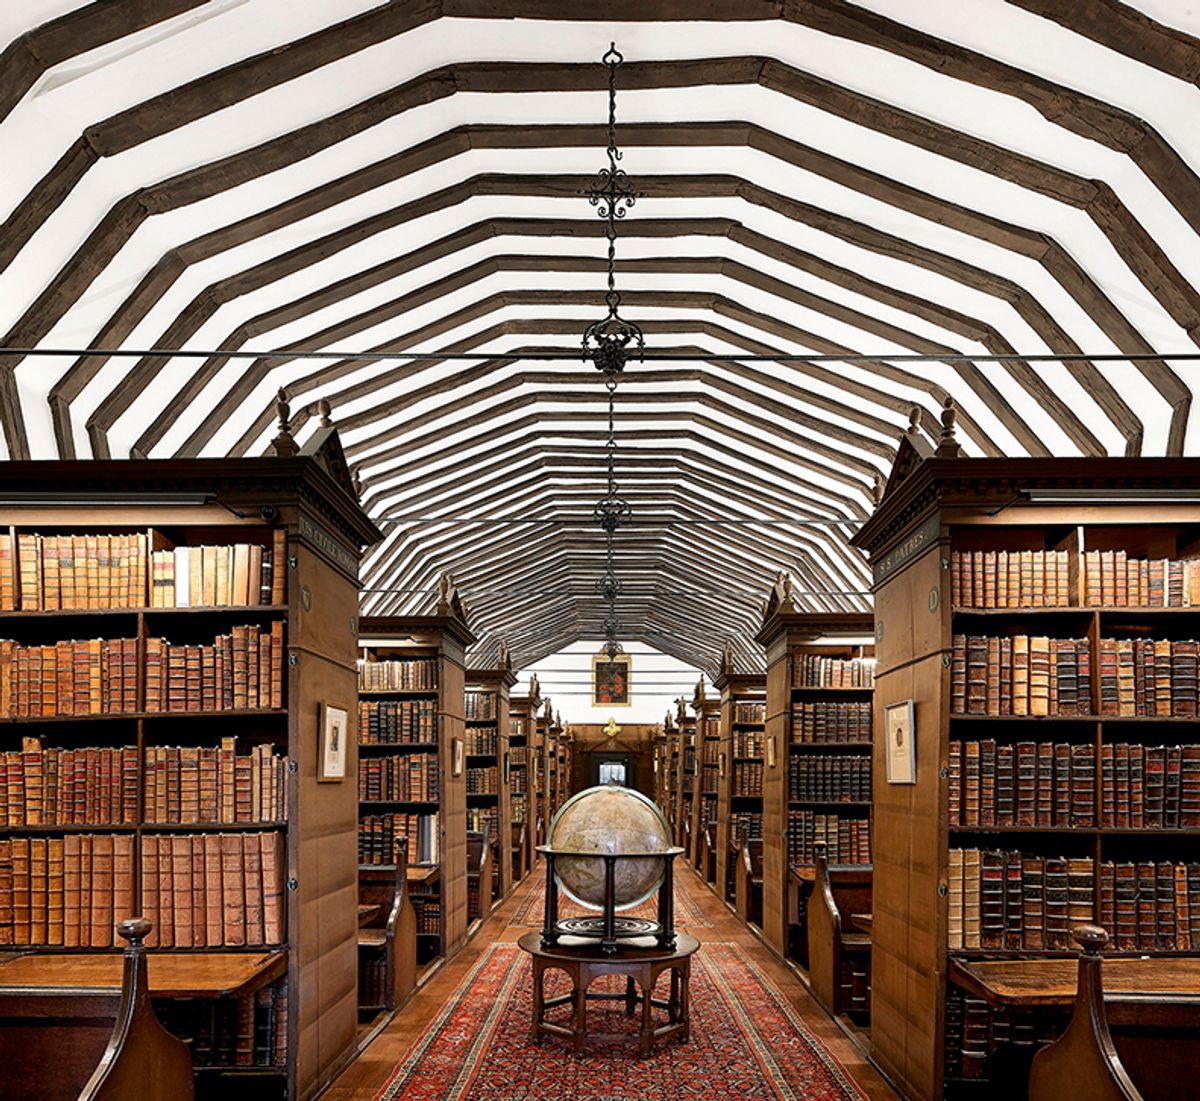 The 10-year restoration project included renovating the Old Library
© Hufton+Crow